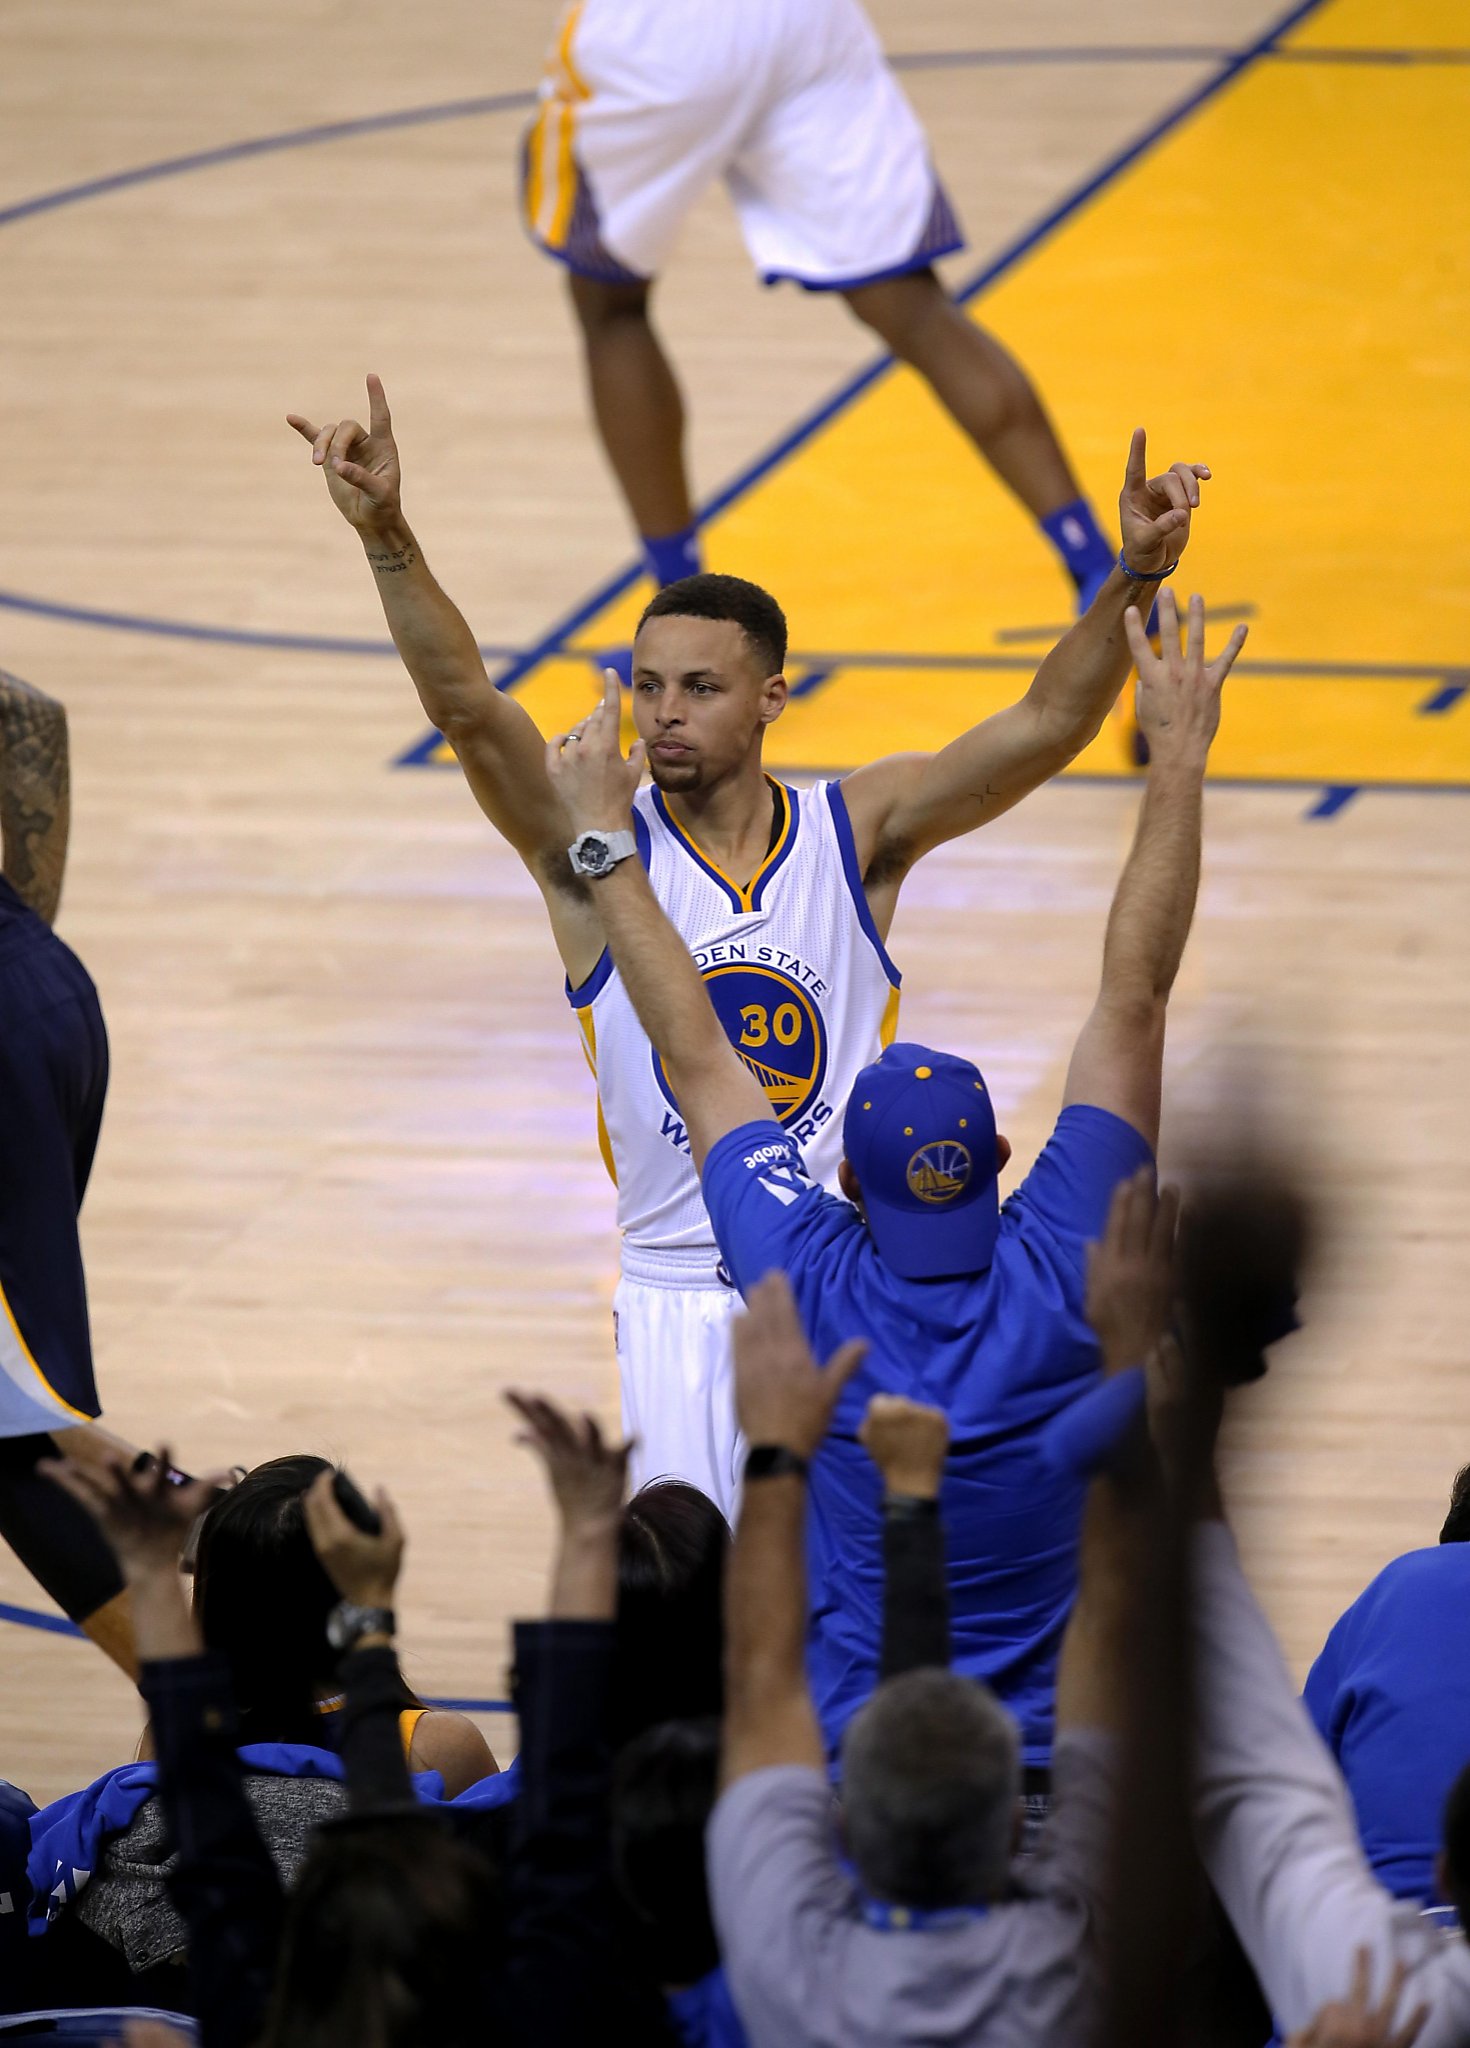 Stephen Curry gives kudos to former teammate on Dunk Contest win